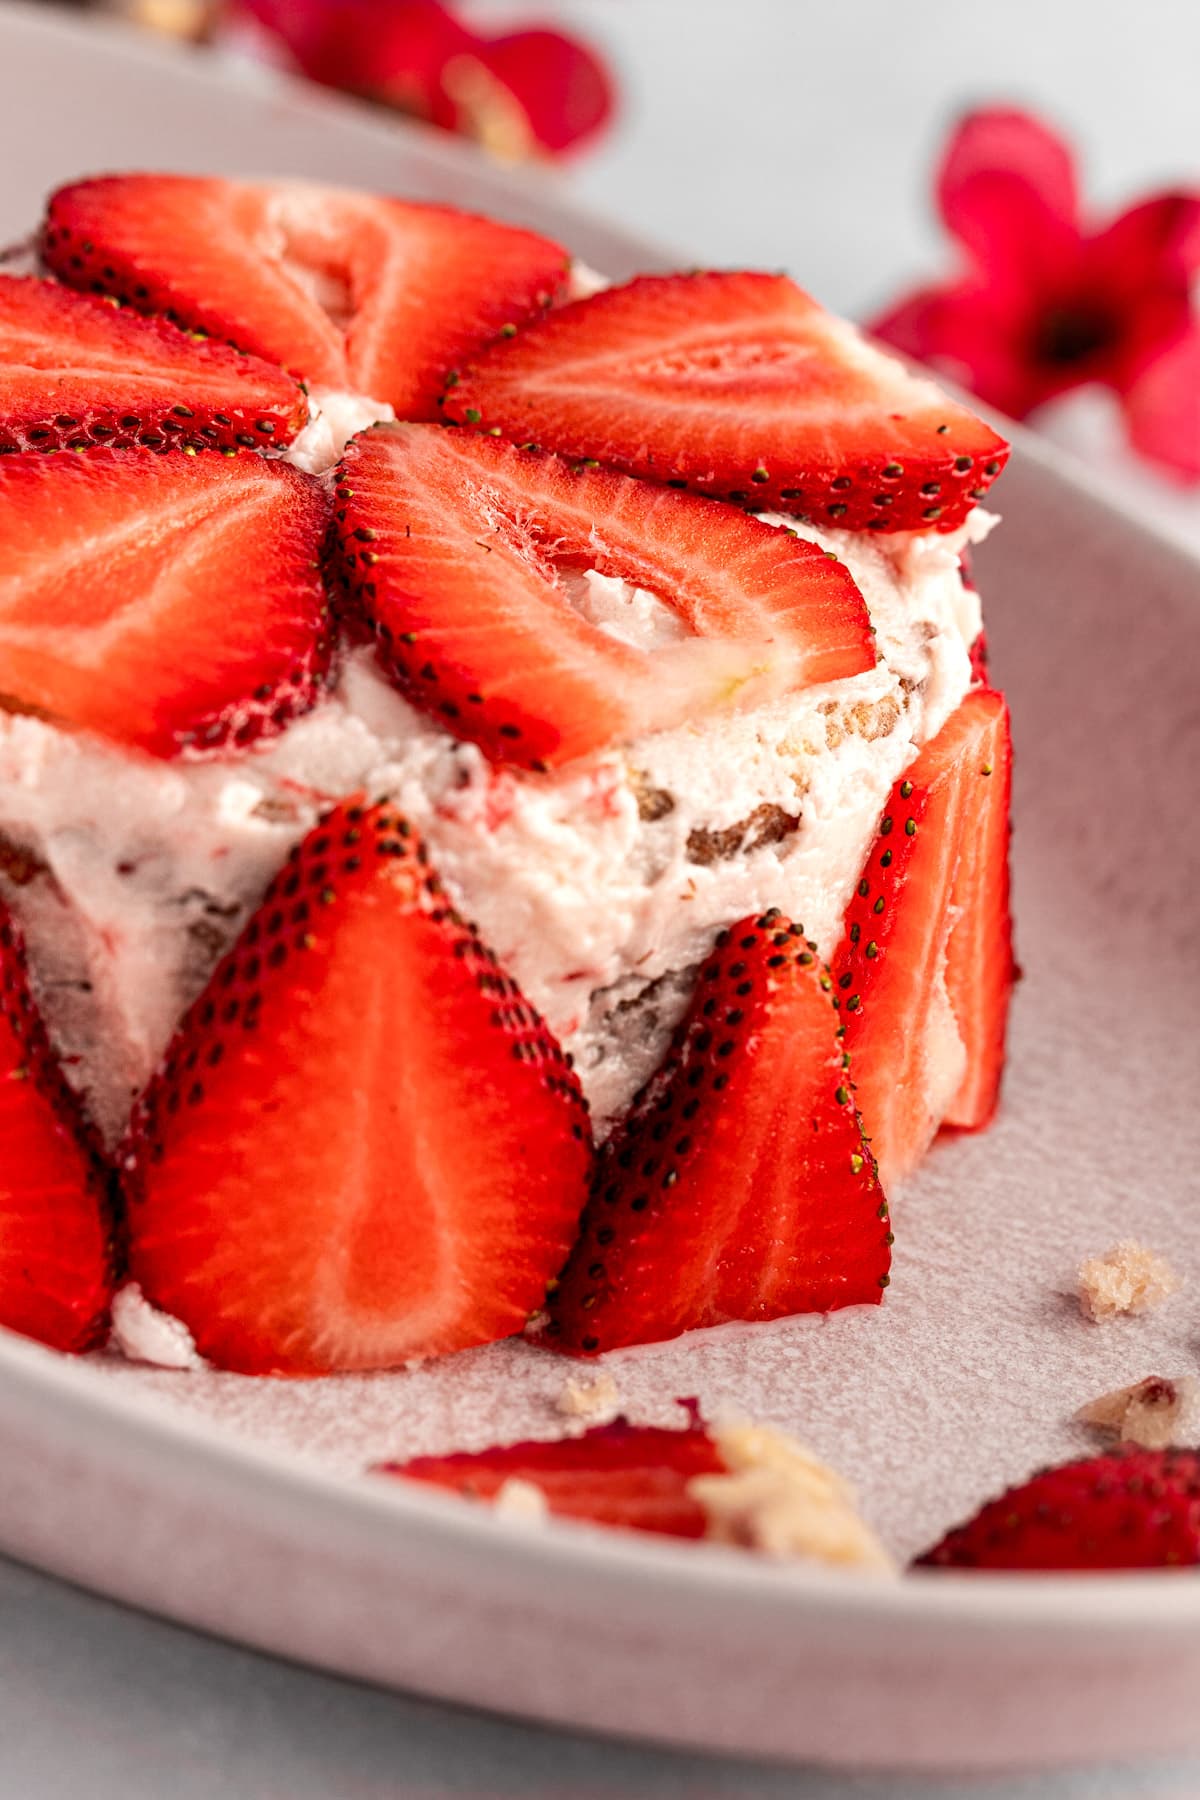 Eye level view of a mini strawberry cake decorated with strawberry slices, sitting on a pink serving platter.